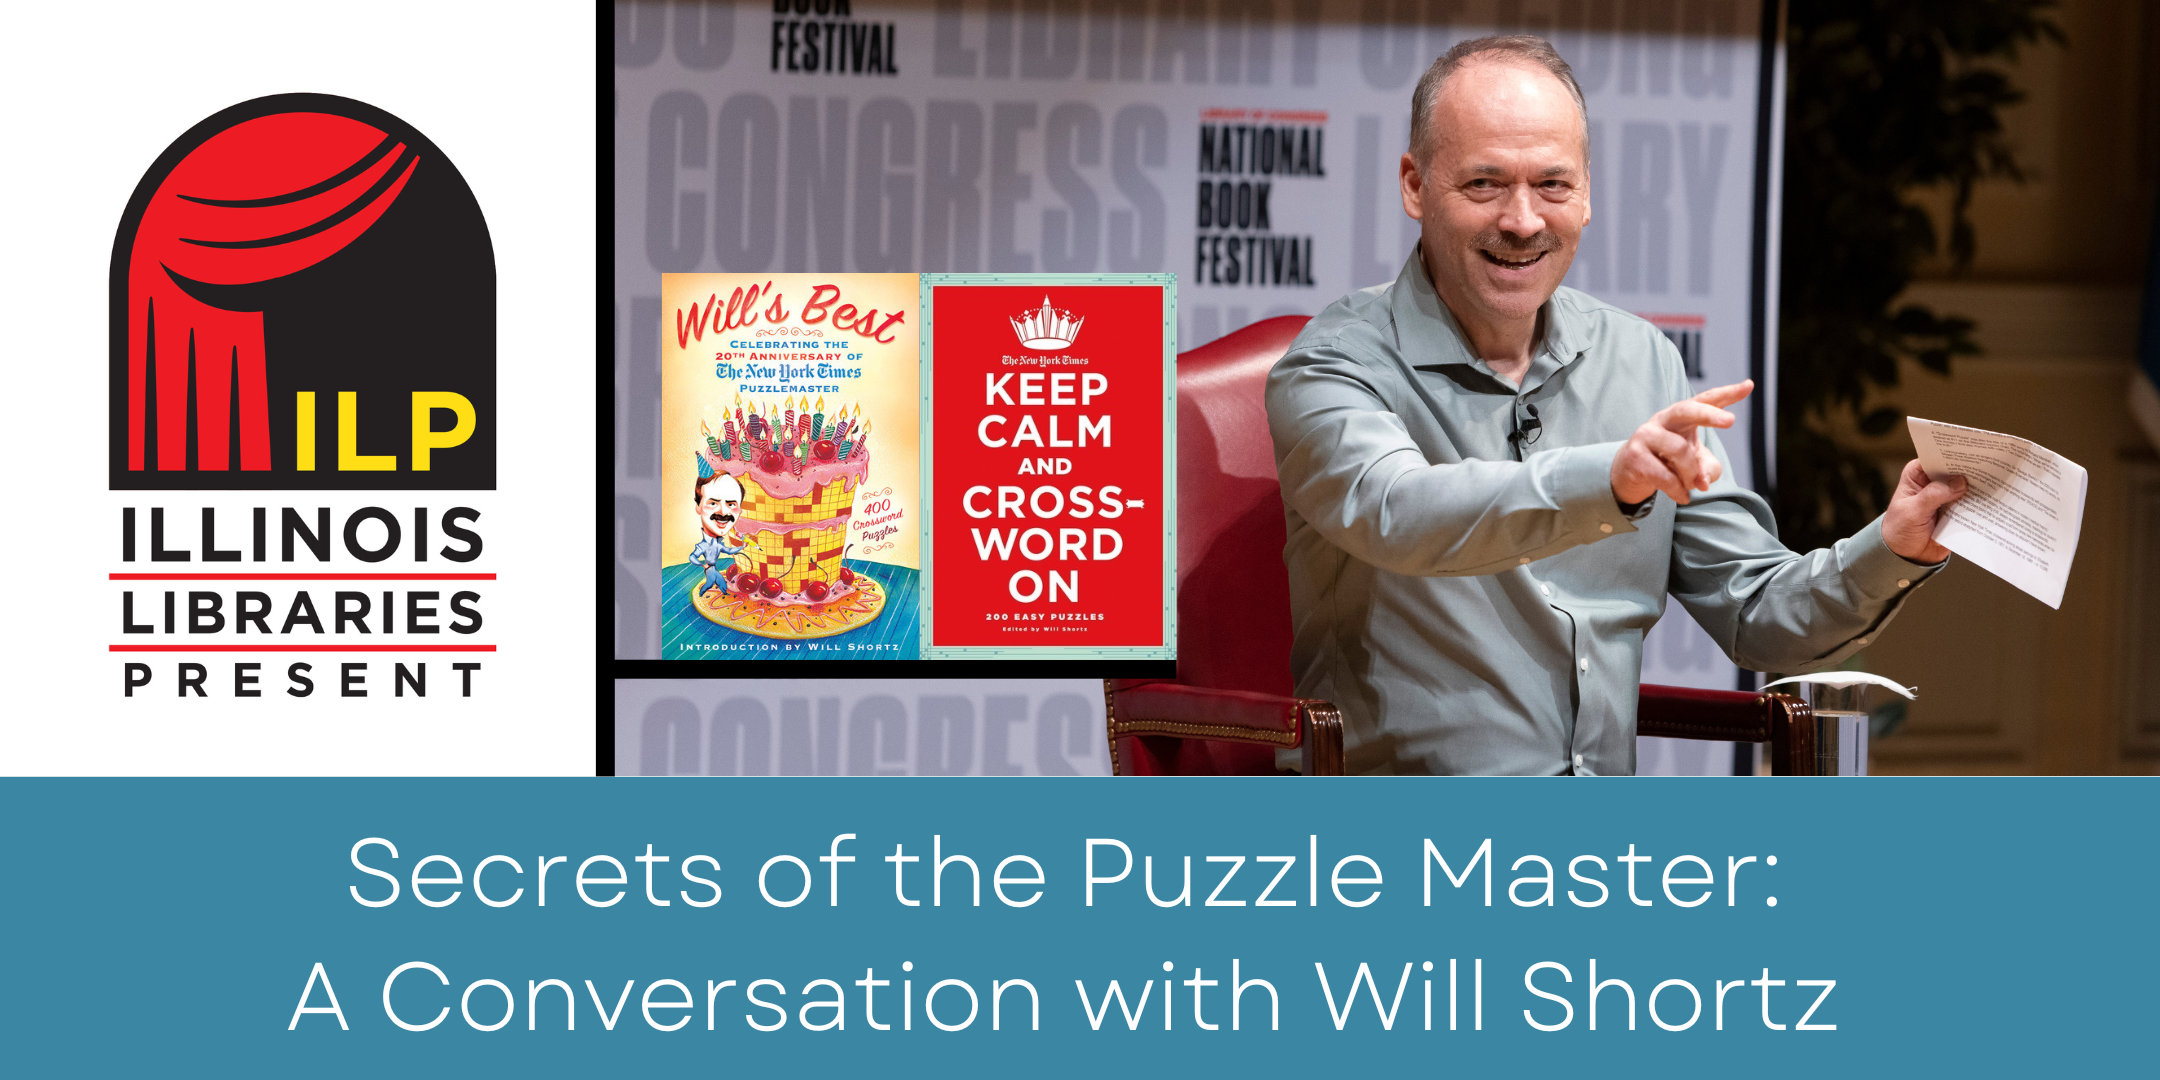 image of "Secrets of the Puzzle Master: A Conversation with Will Shortz"